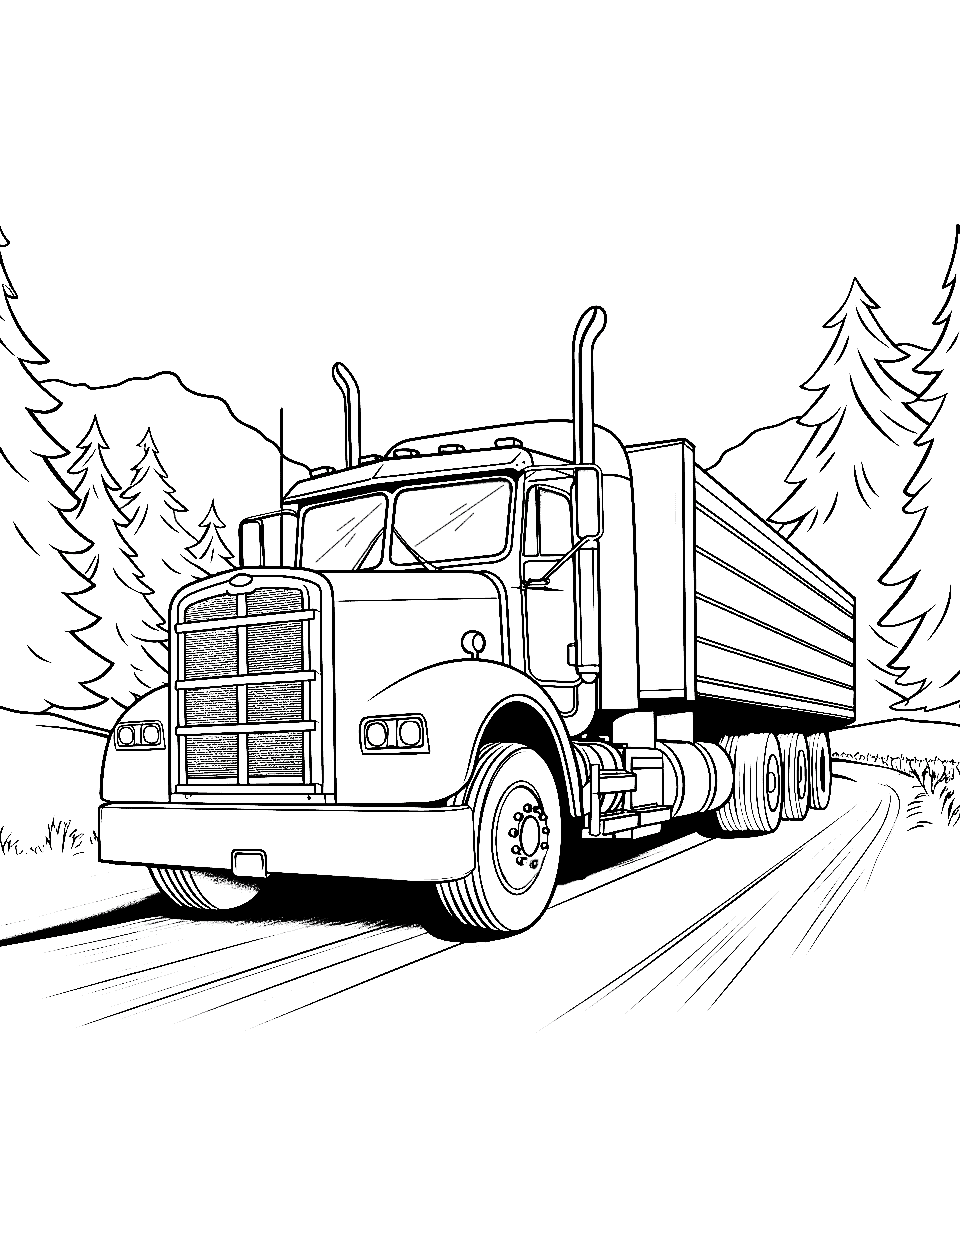 14 Wheeler on Haul Coloring Page - A 14-wheeler truck driving on a solitary road.